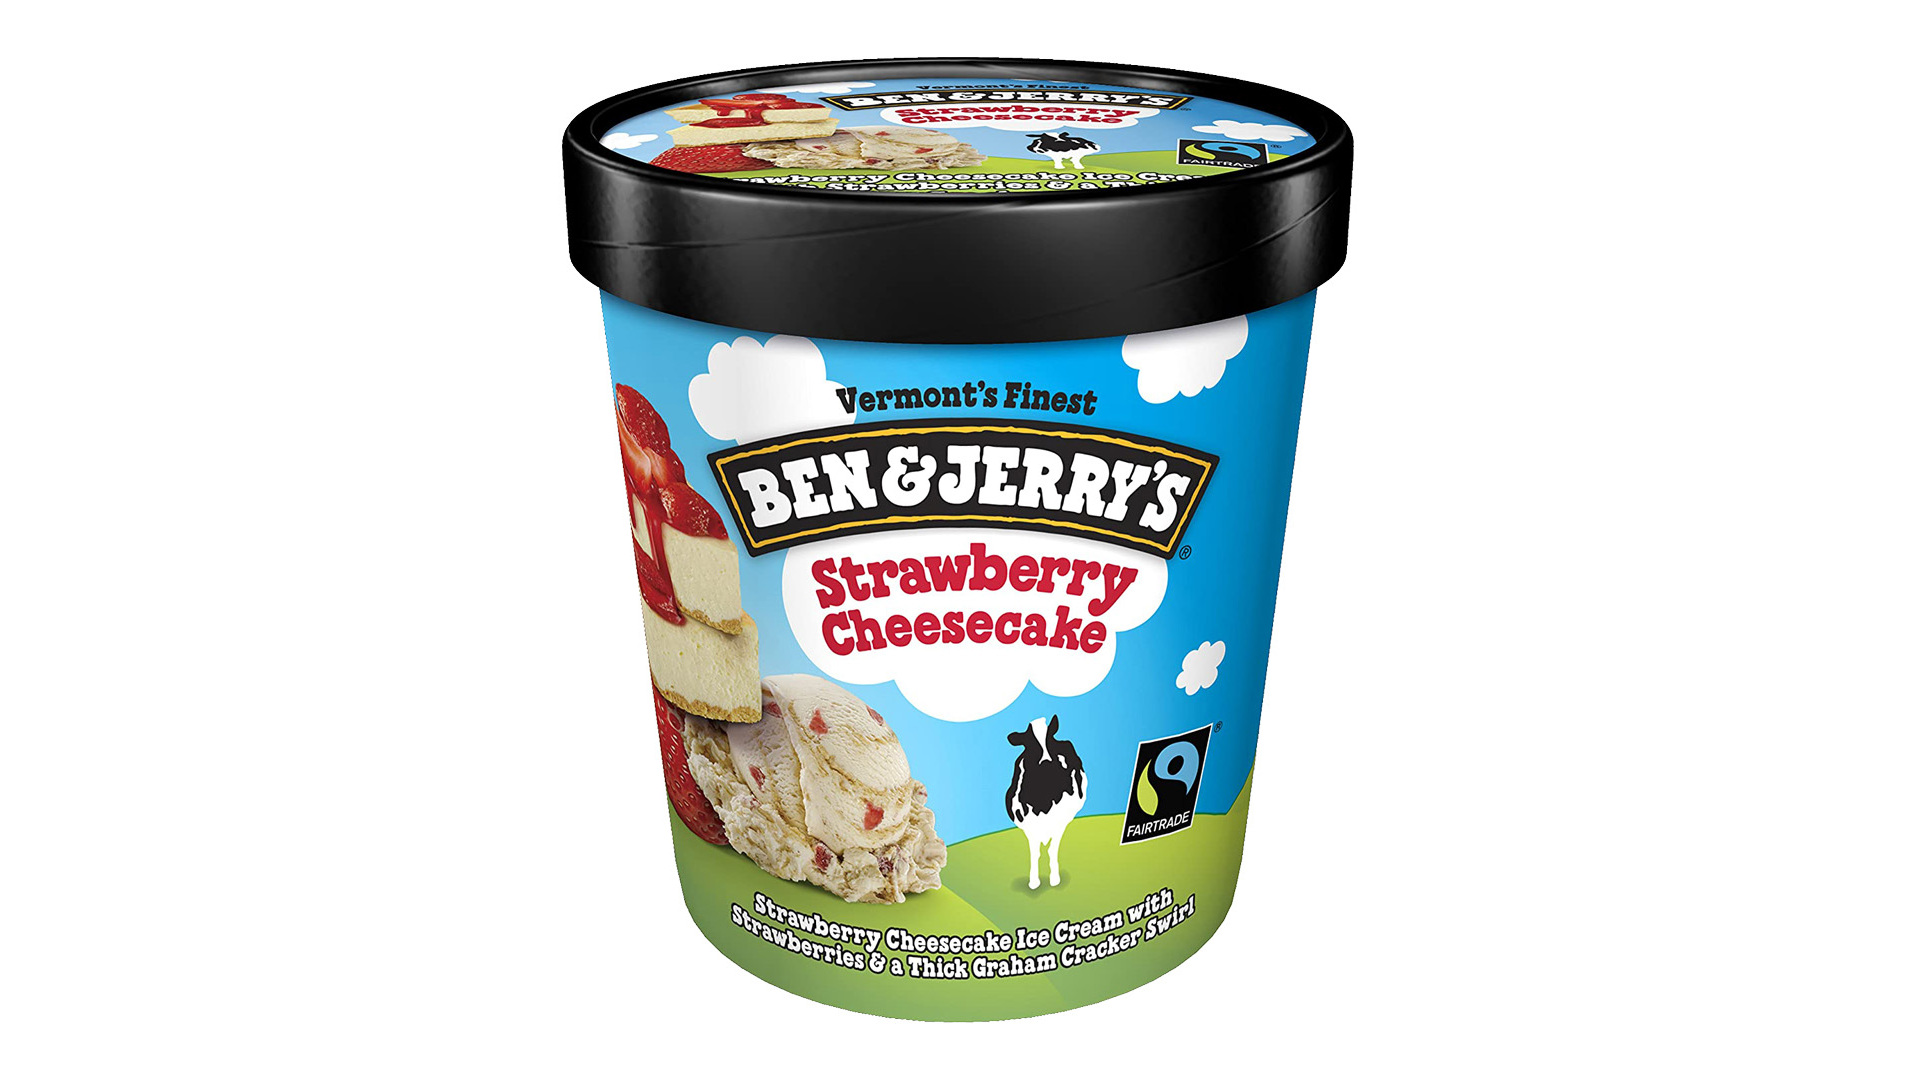 Ben & Jerry's Strawberry Cheesecake 500ml - Wraps Delivery in Maryland E20